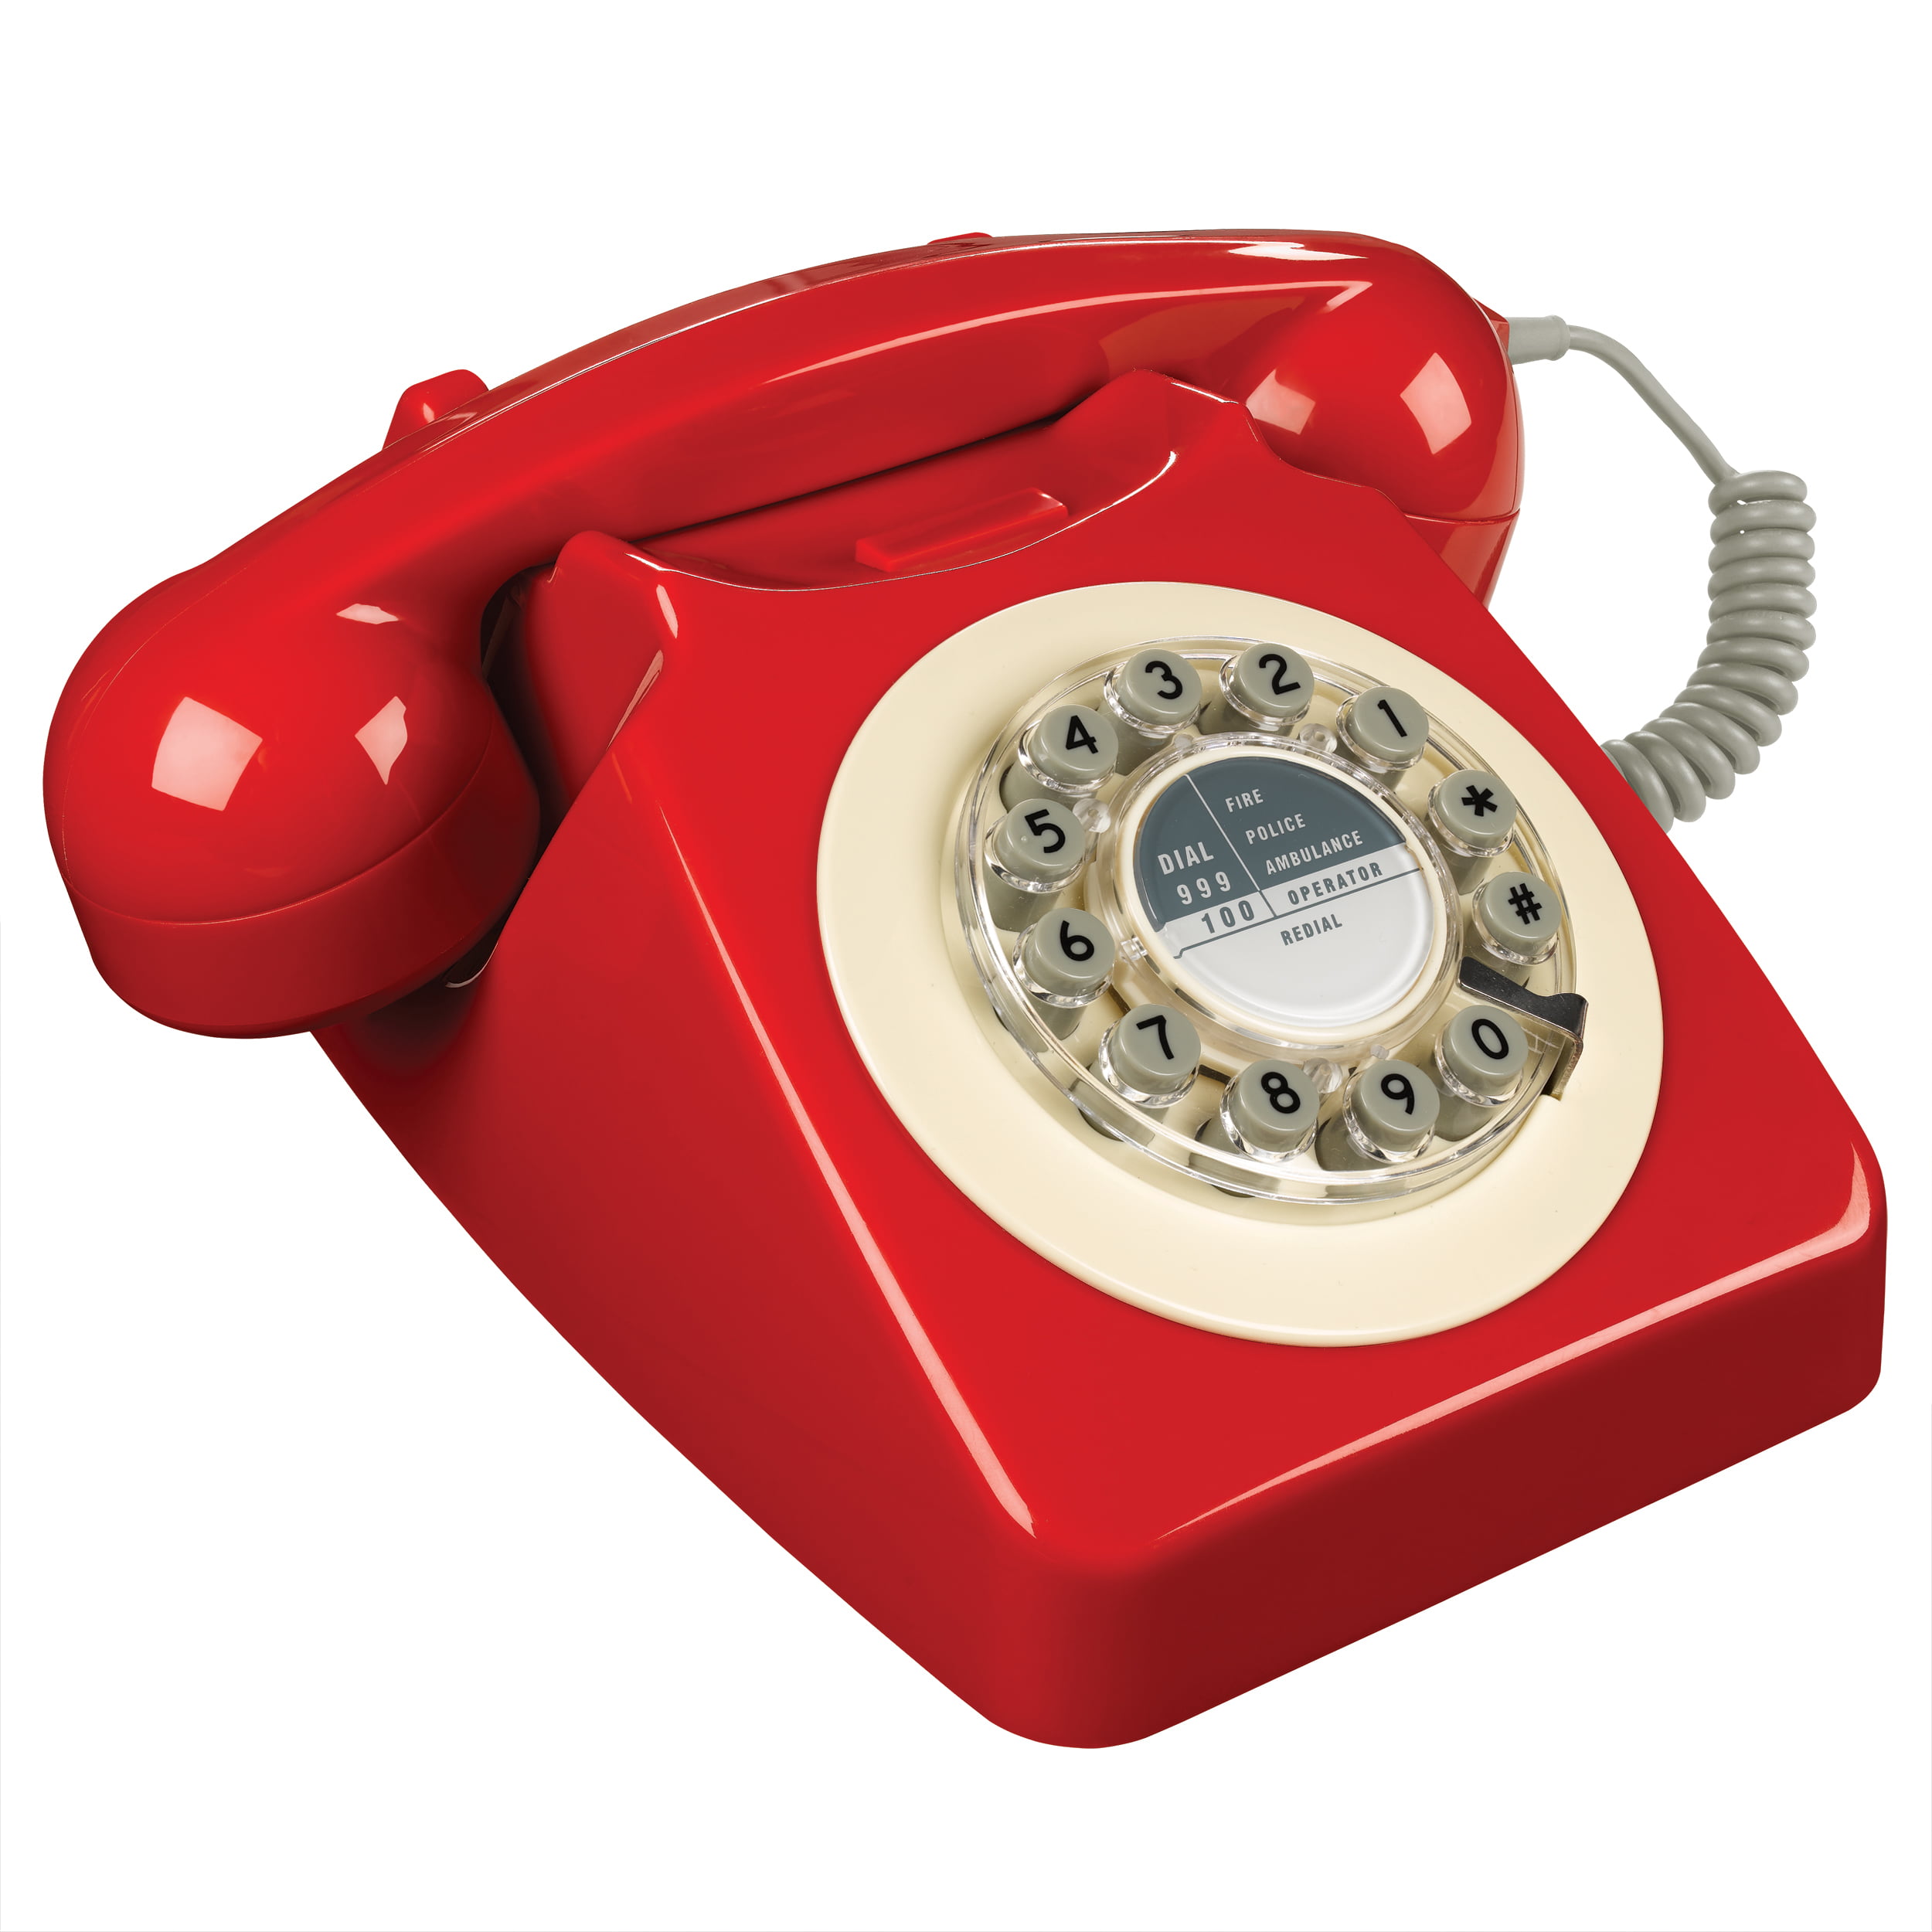 Rotary Dial Corded Telephone